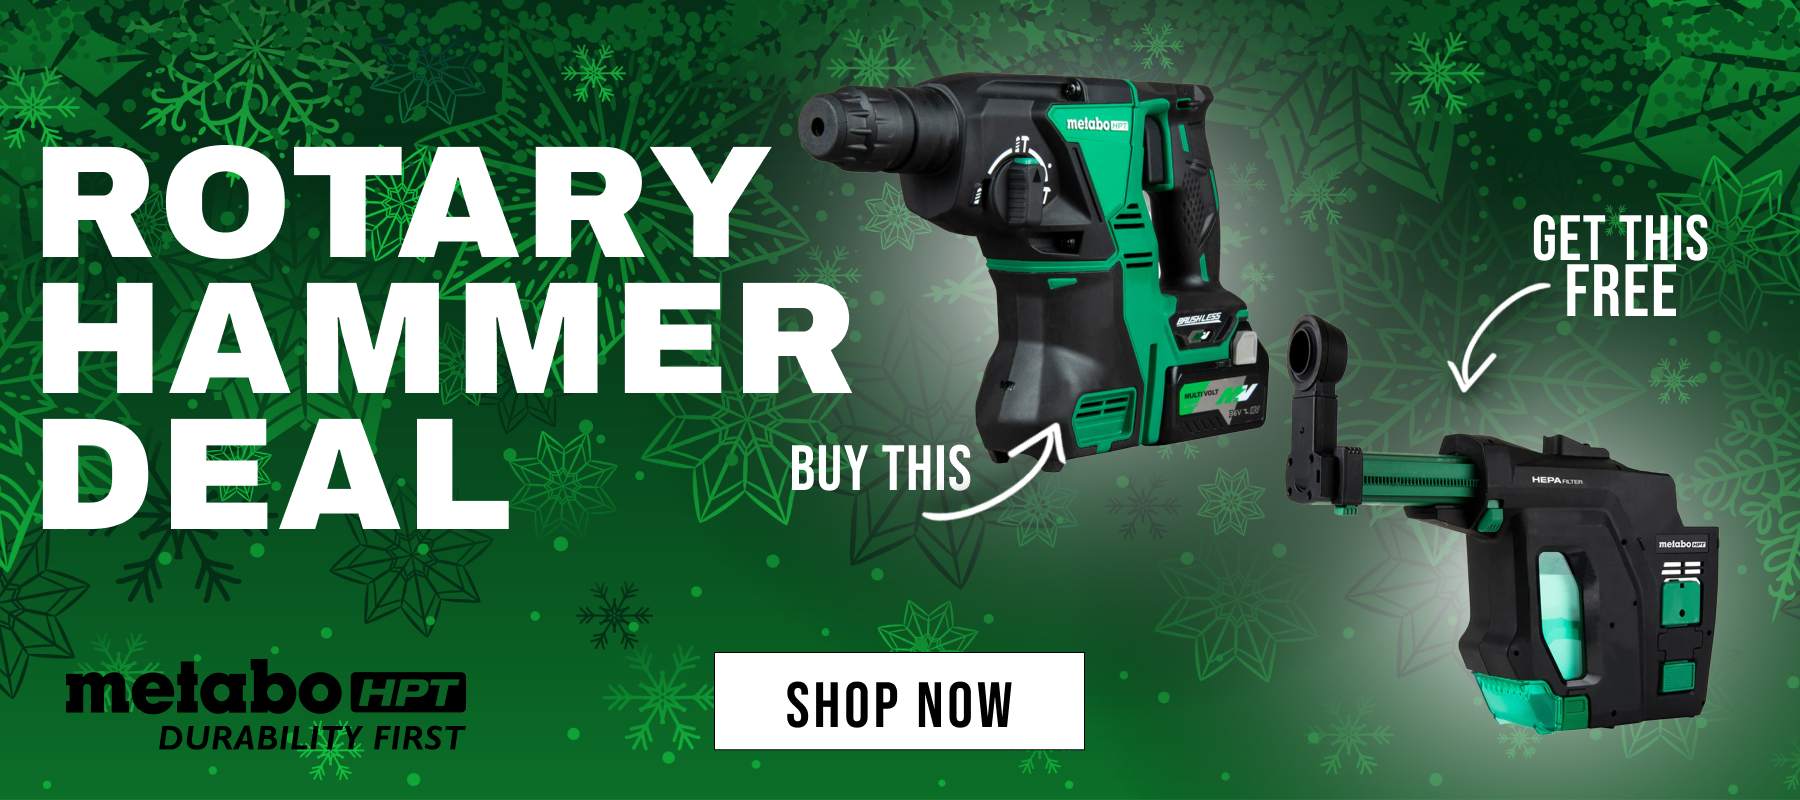 Metabo HPT // Rotary Hammer Deal // Buy This, Get This Free // SHOP NOW